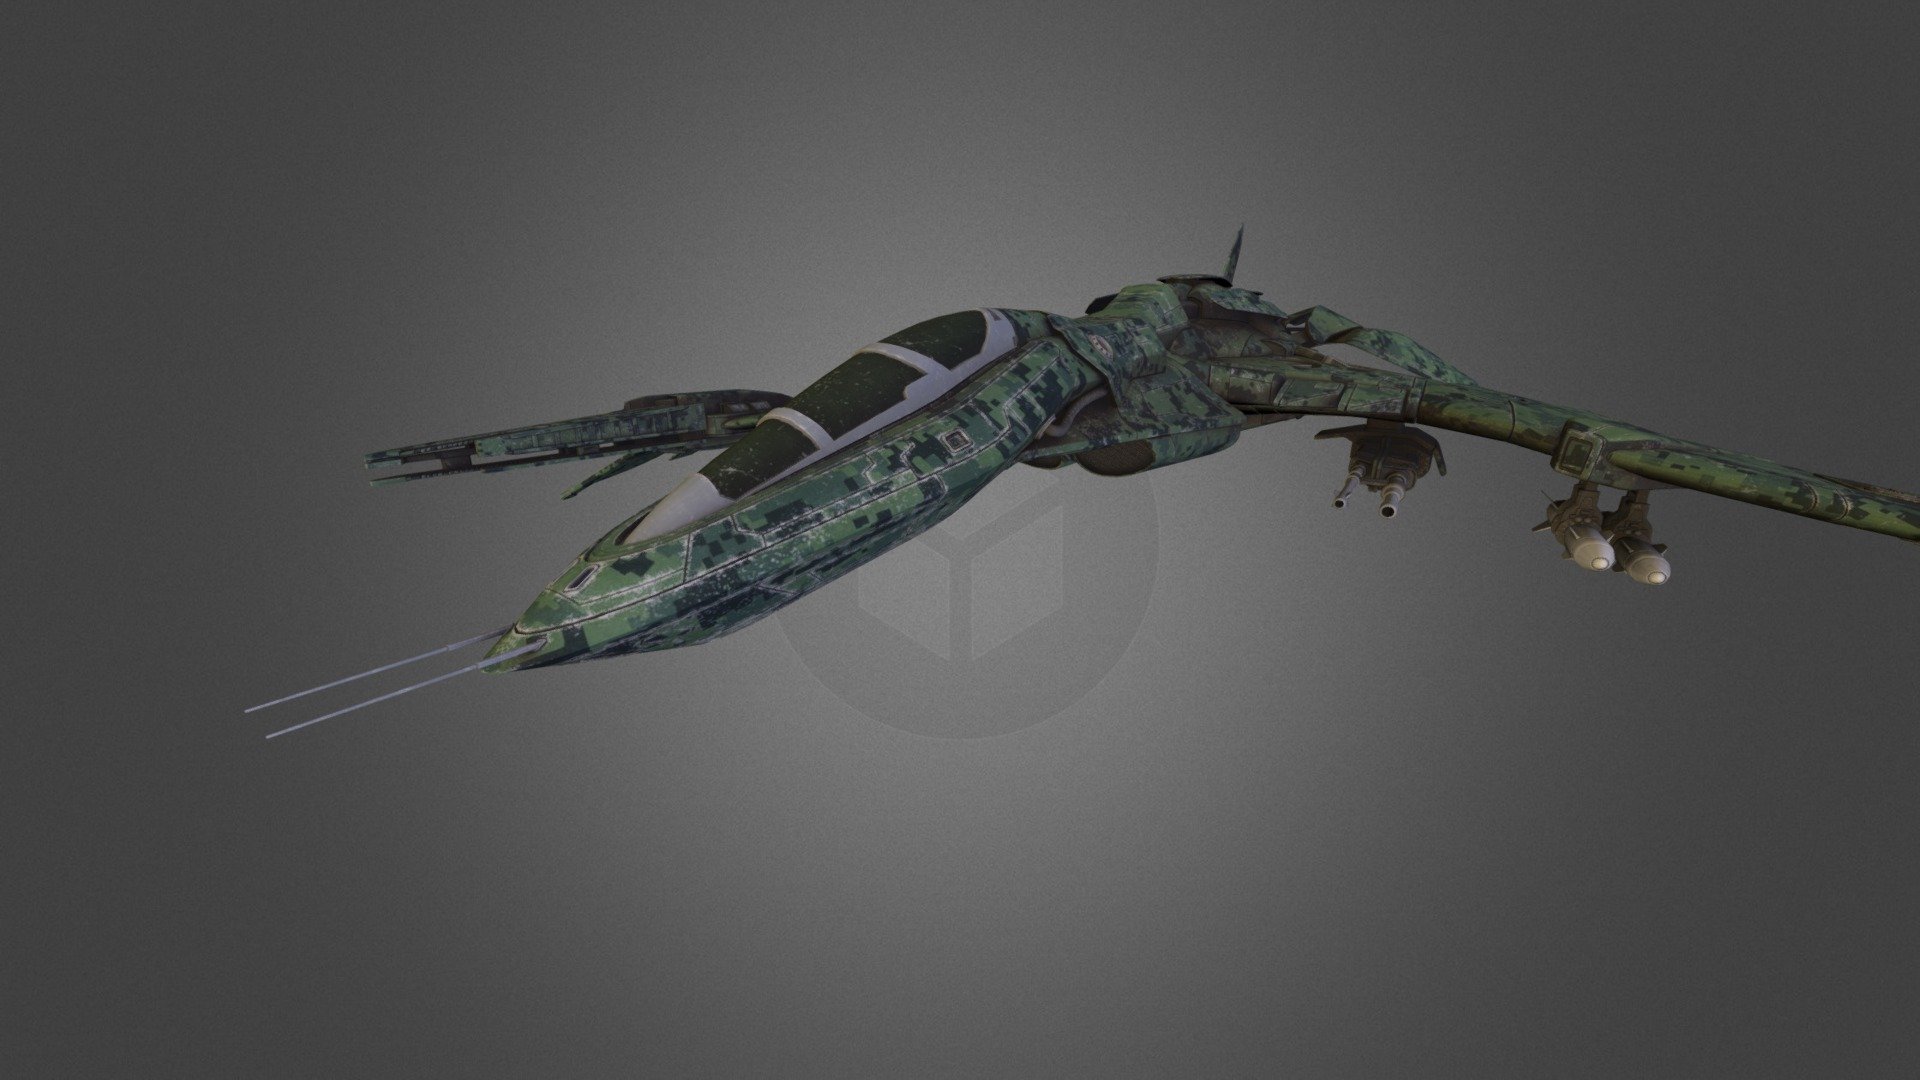 Model by Chris Kuhn with unwrap/texturing by me. You can purchase the model here:  http://cgcookiemarkets.com/blender/all-products/frigid-affection-sci-fi-fighter/ or here: -link removed- - Frigid Affection - 3D model by yazjack 3d model